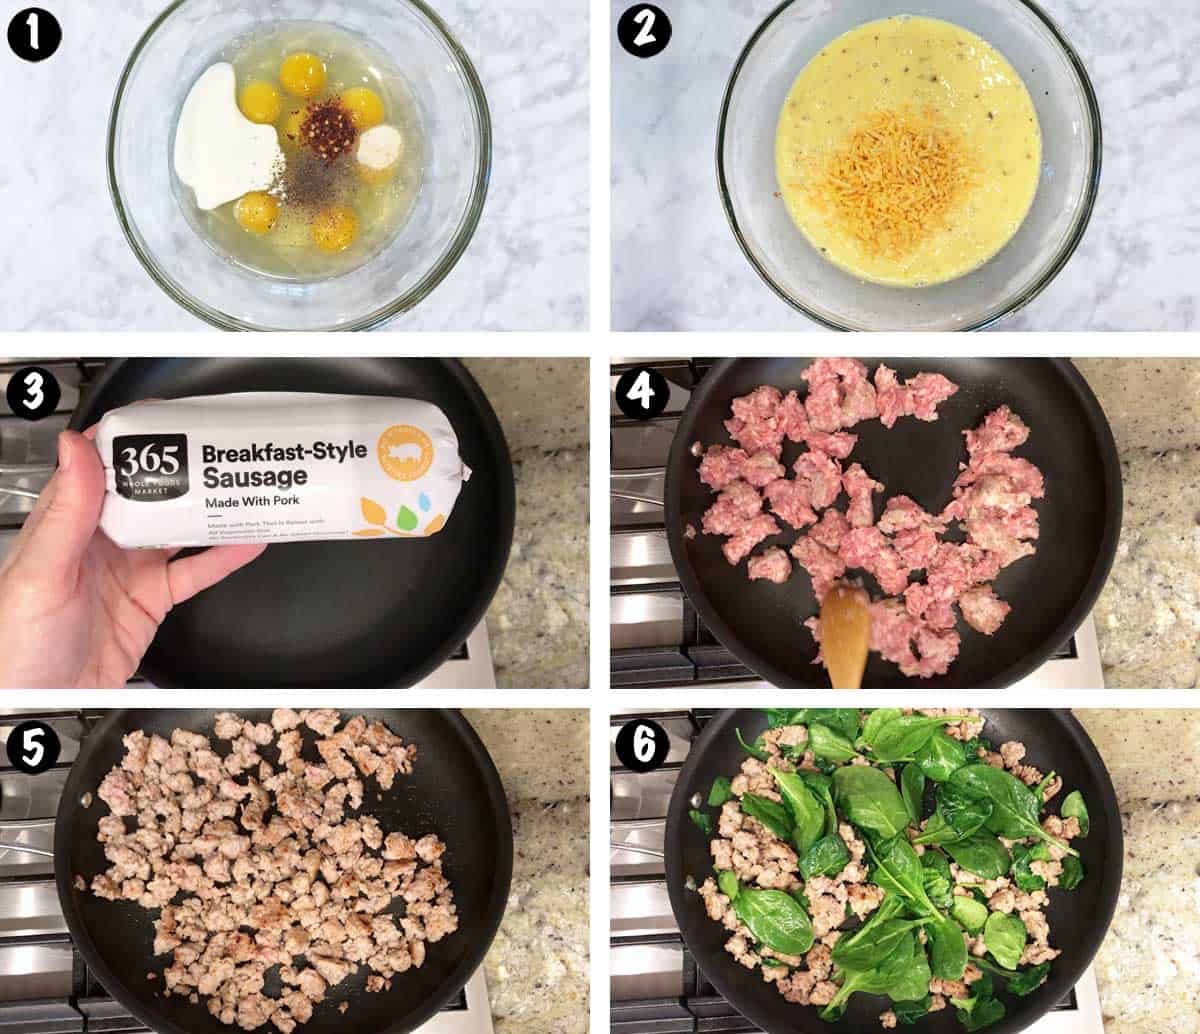 A six-photo collage showing the steps for making a keto breakfast casserole.